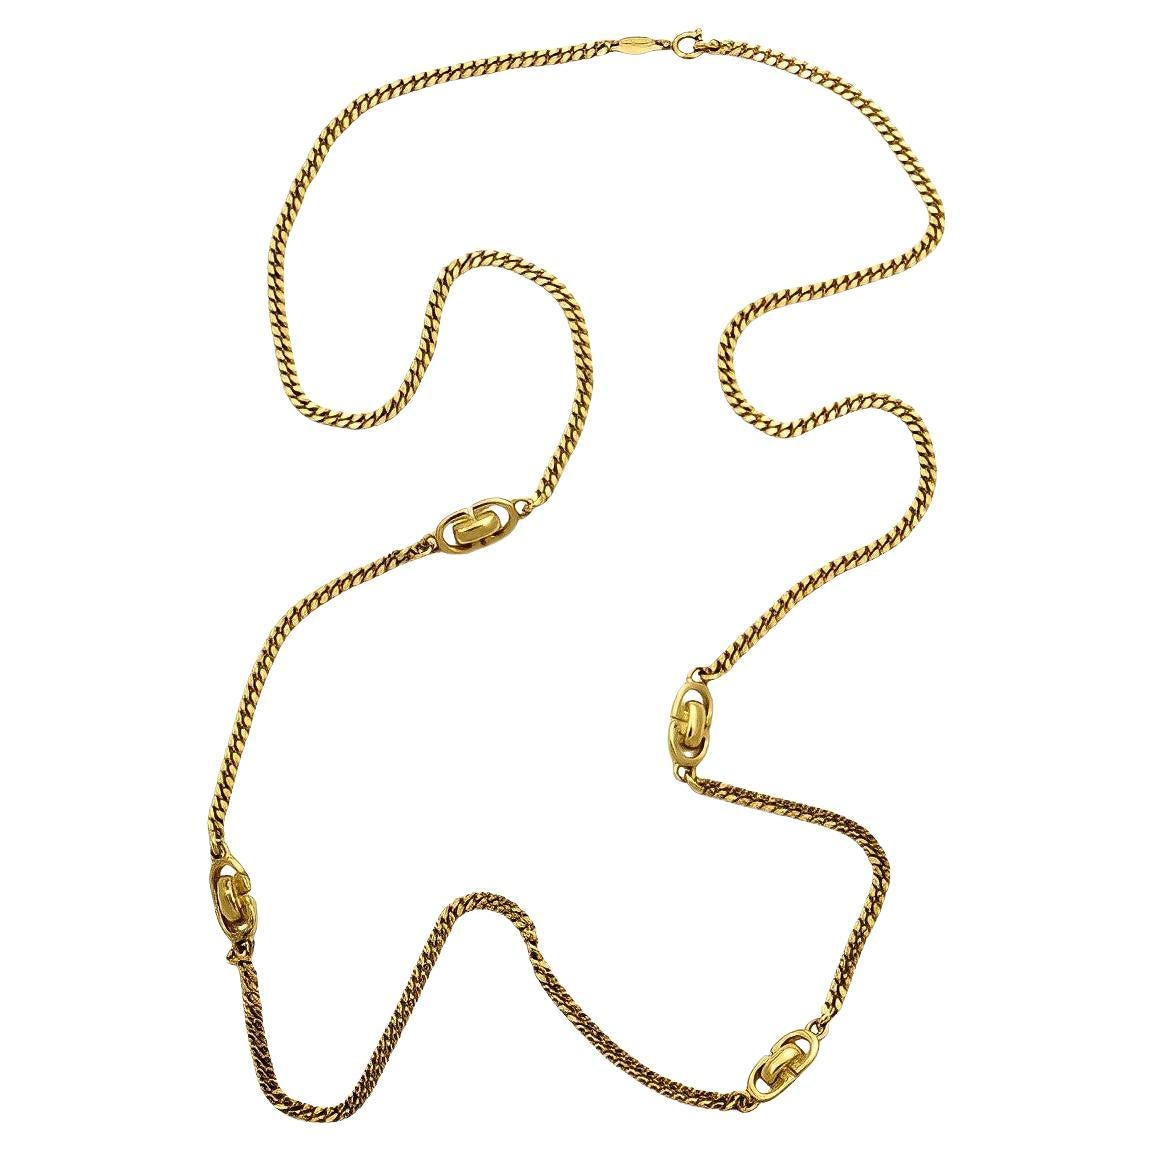 Christian Dior Long Gold Plated Curb Link Chain Necklace circa 1980s